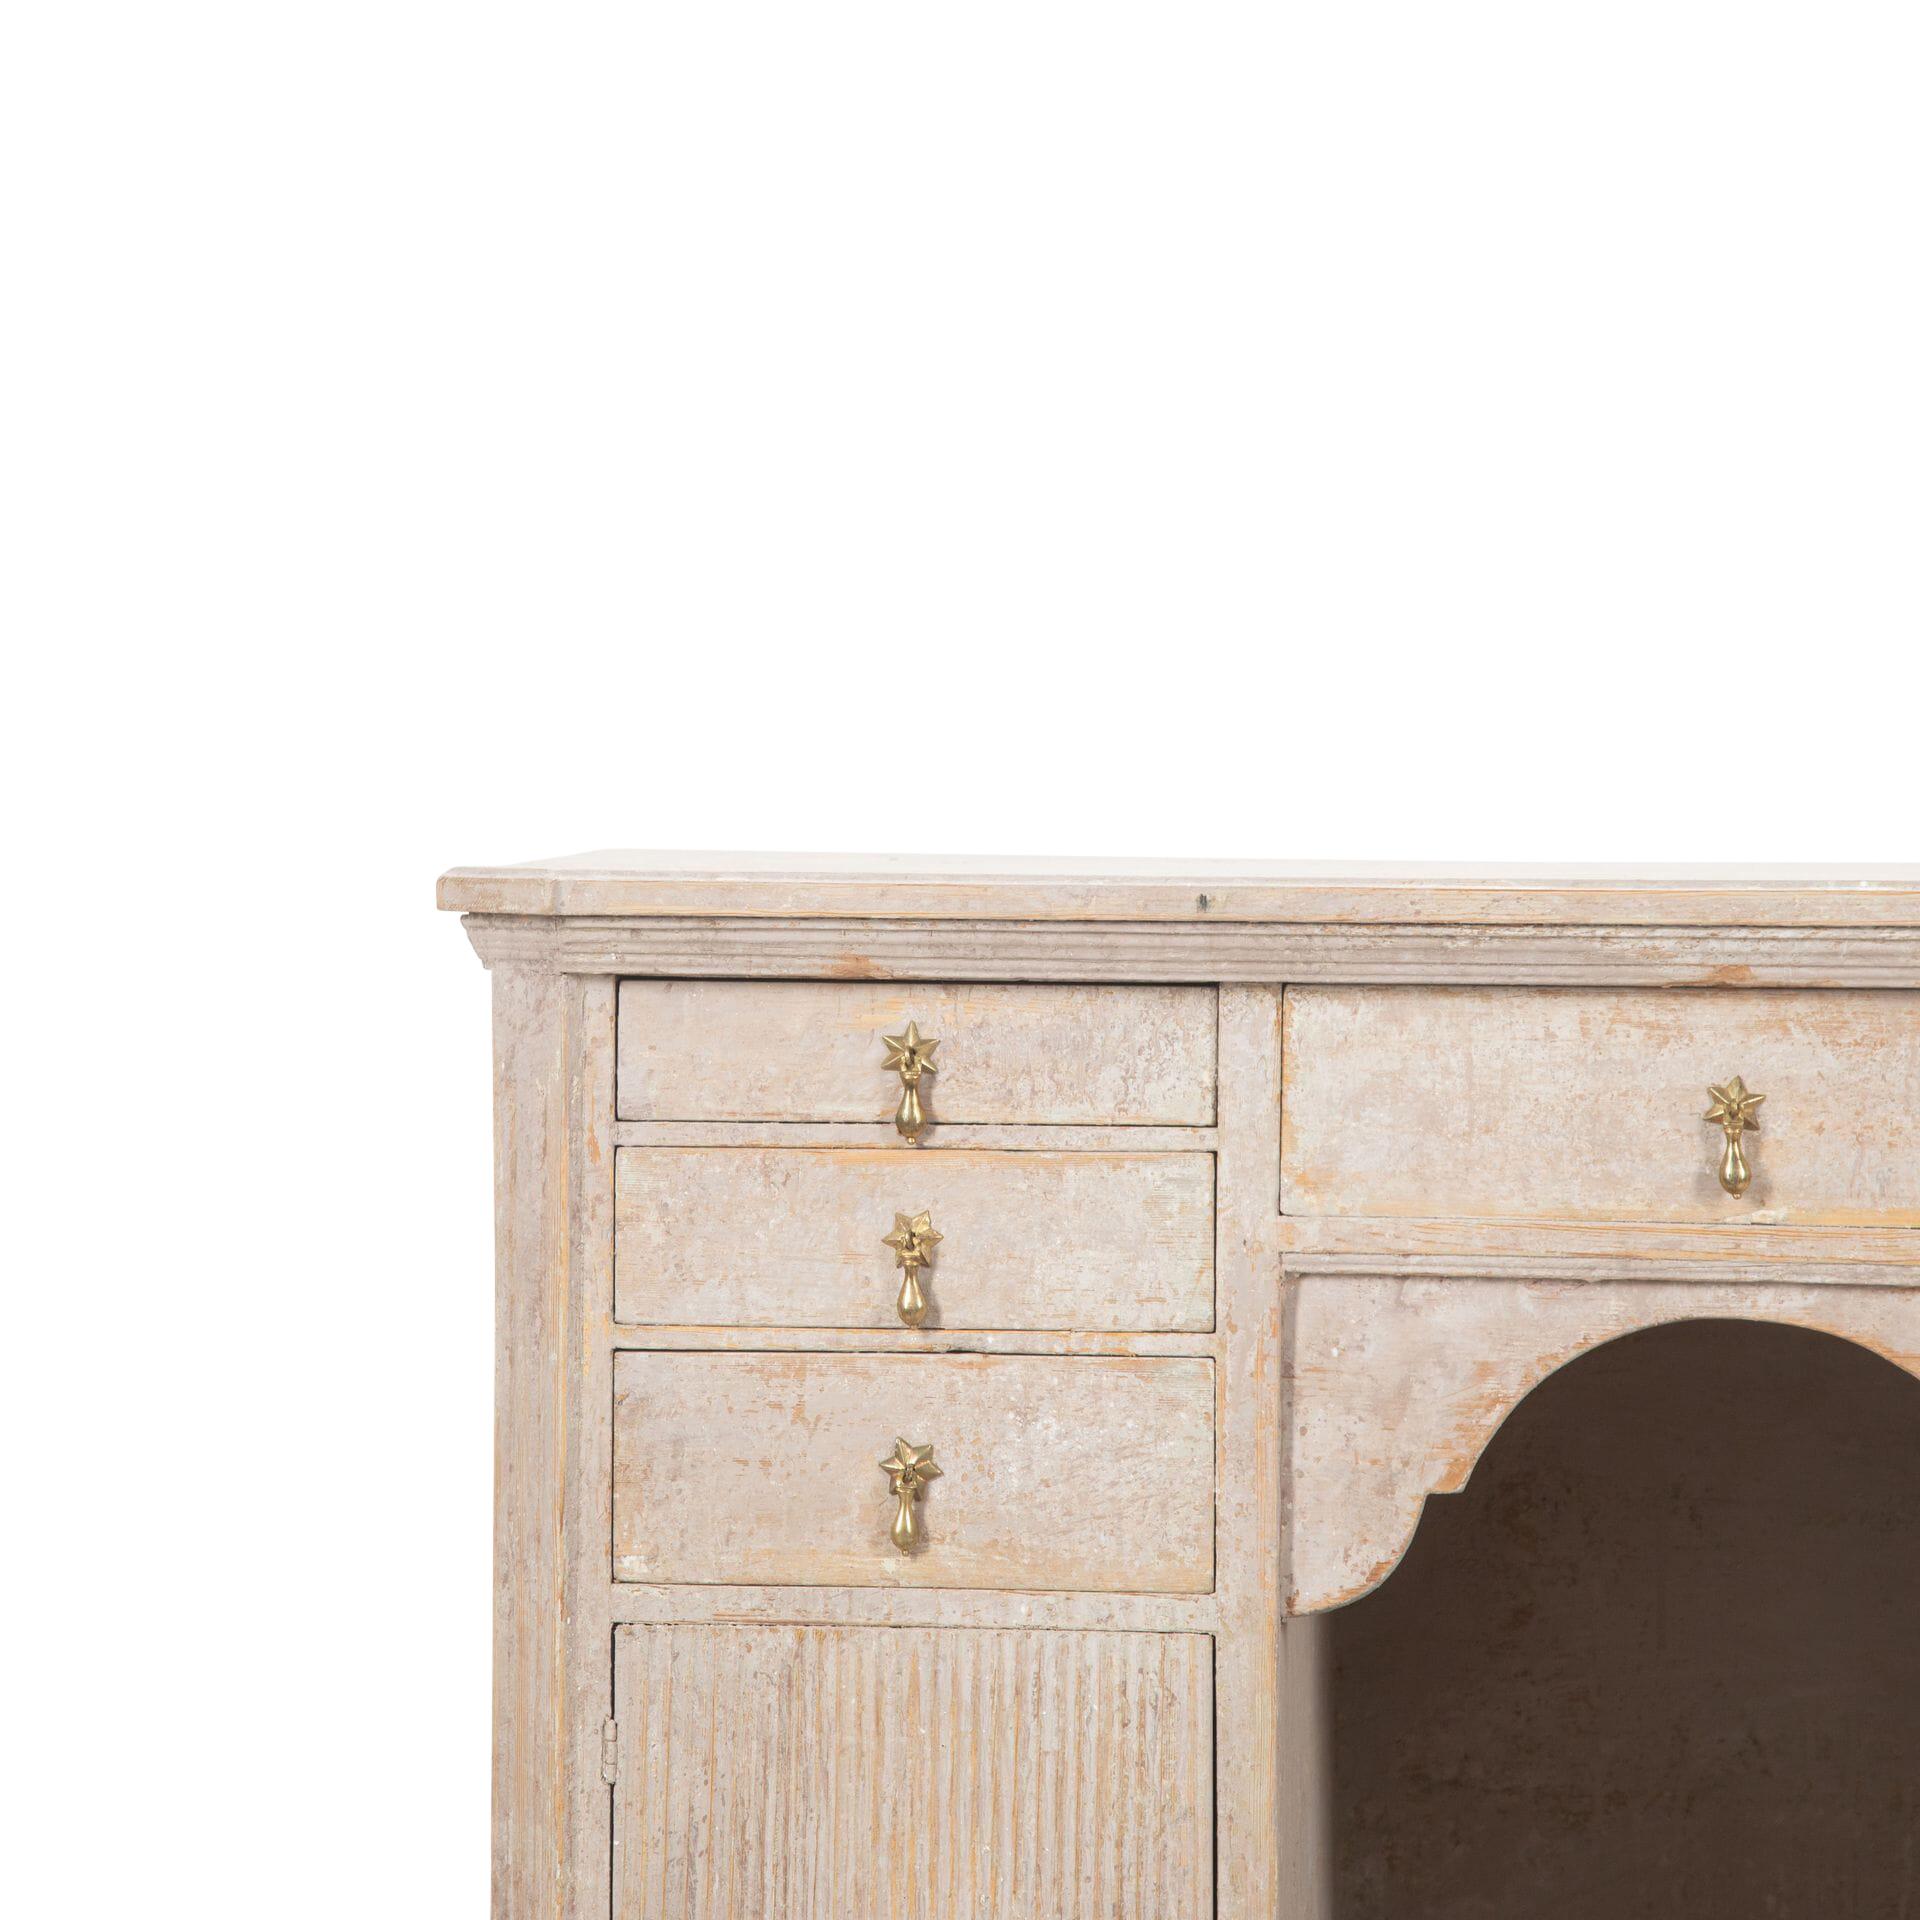 Unusual Gustavian sideboard with carved top.
Below are six short and one long drawer with decorative star handles. 
Reeded doors opening to further storage.